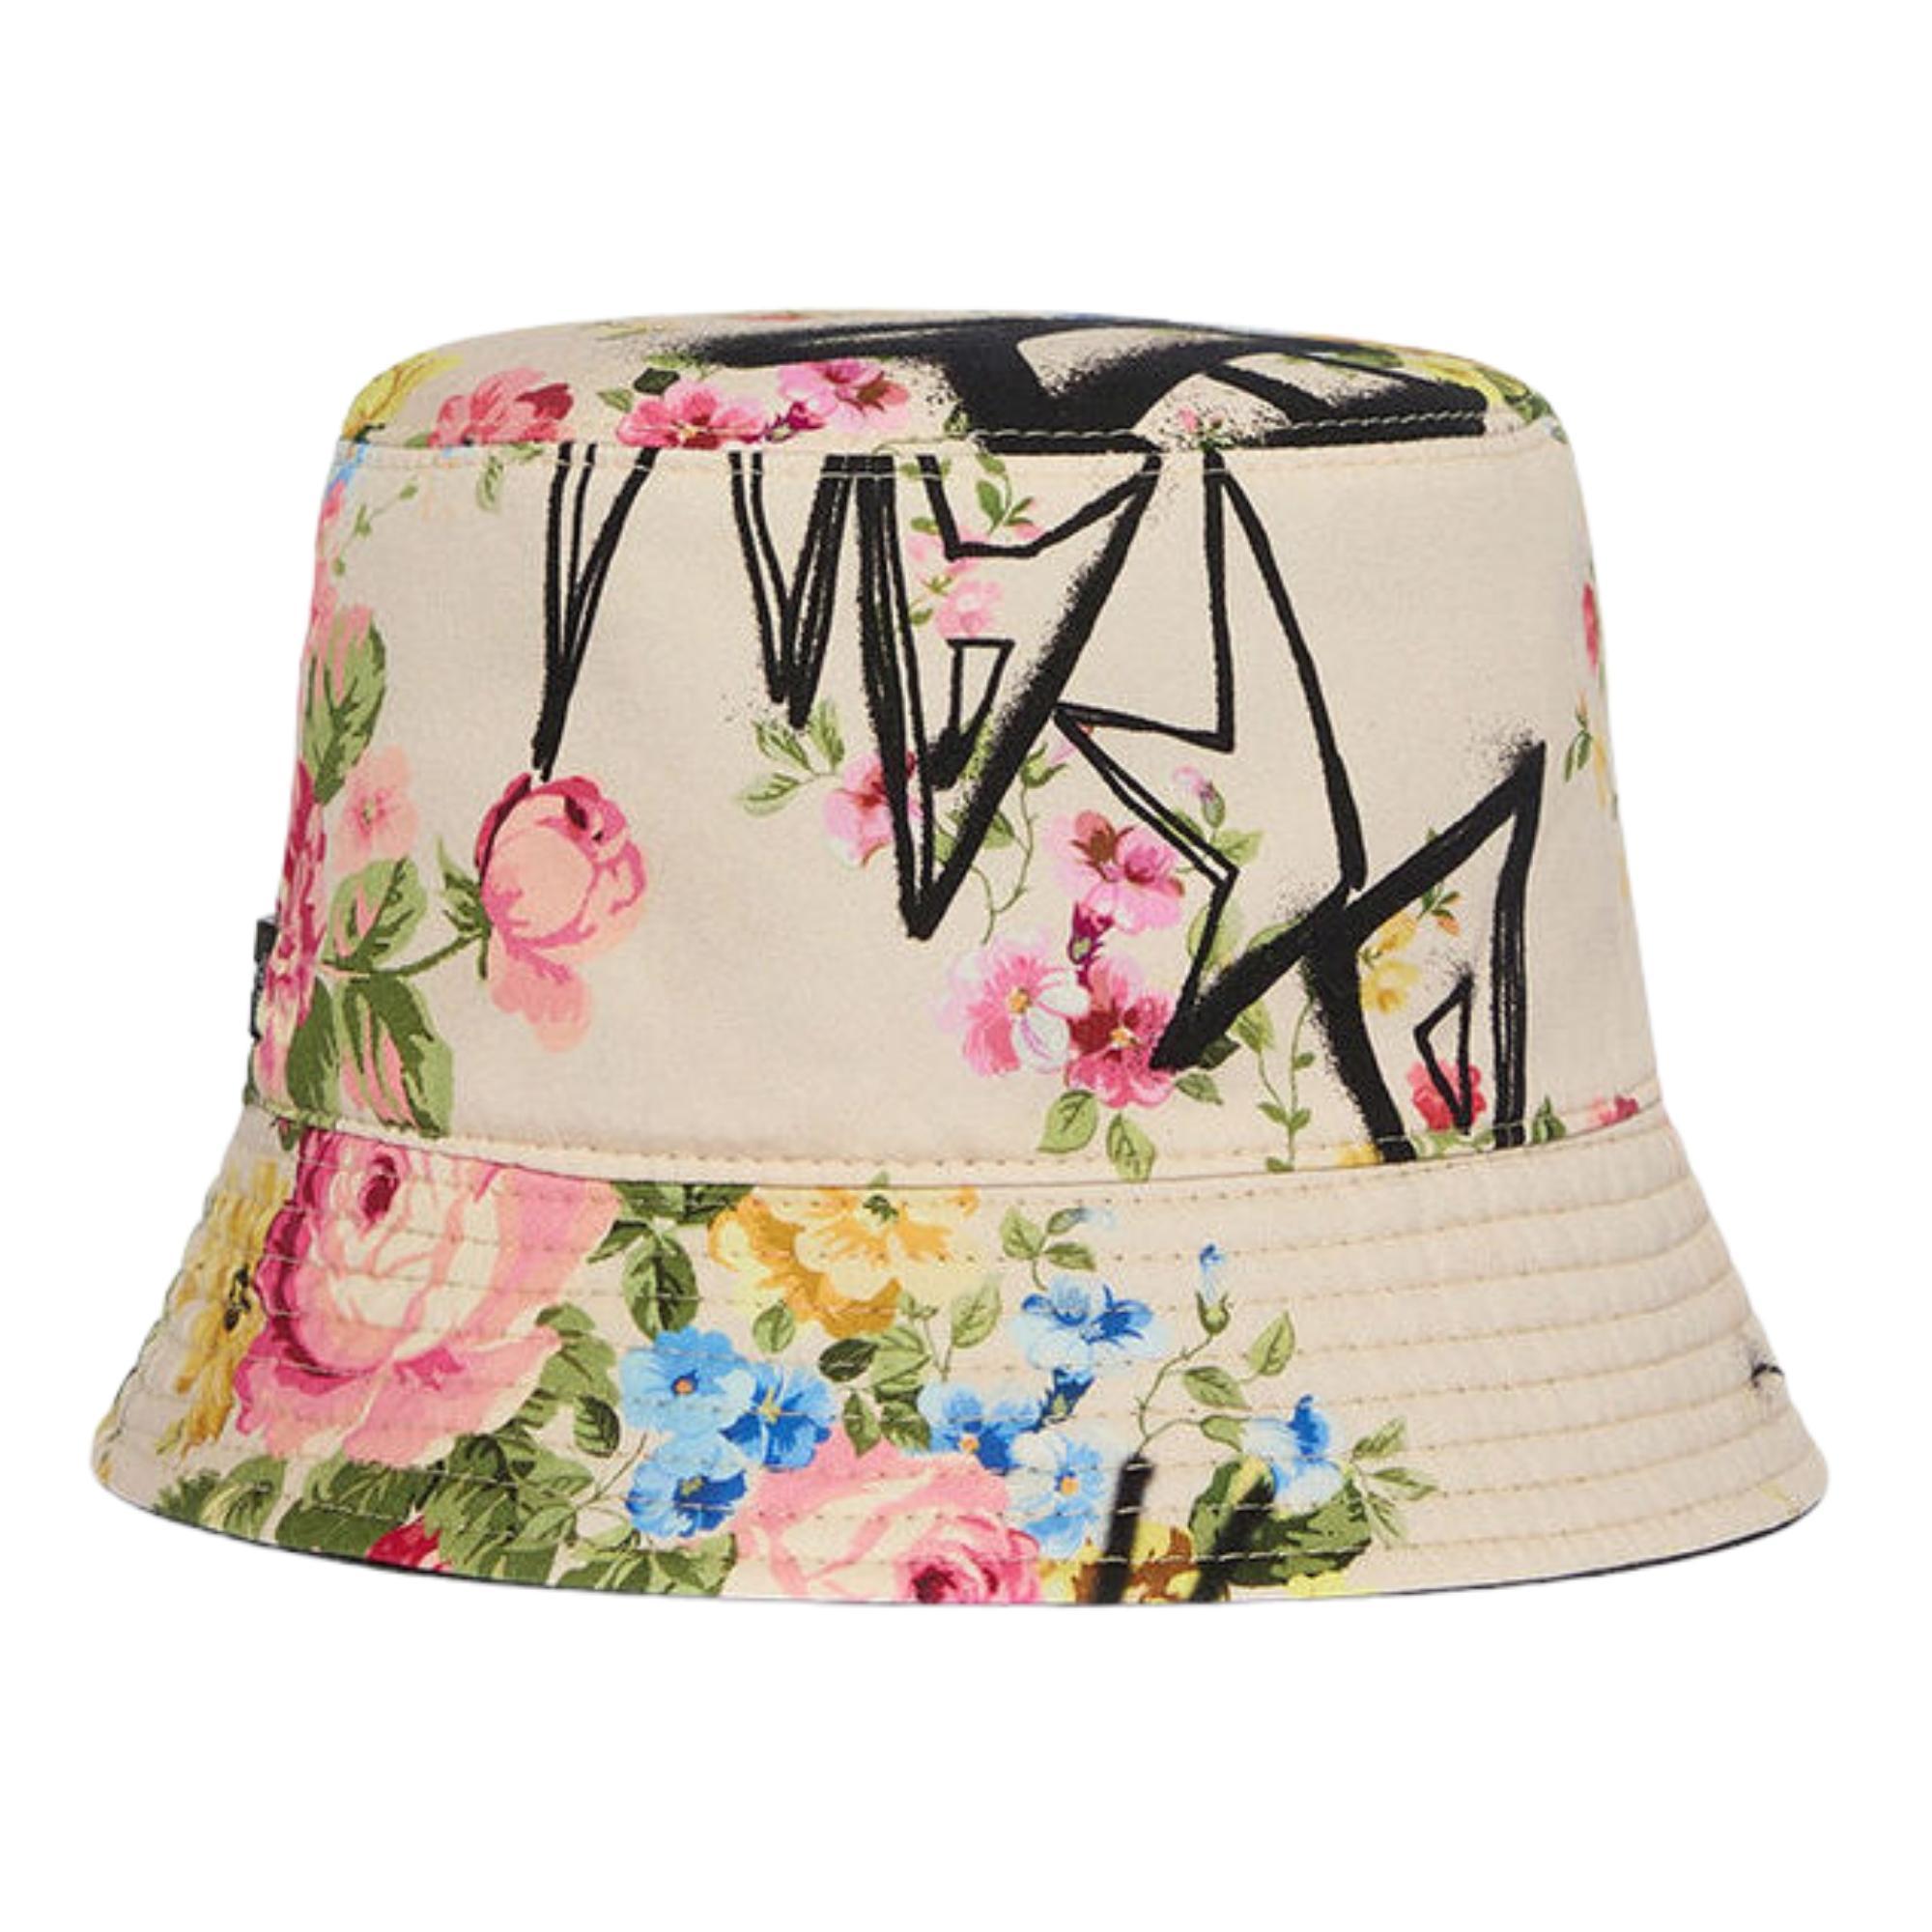 Bucket hat in cotton blend with all-over floral print. Narrow brim. Graffiti-inspired 